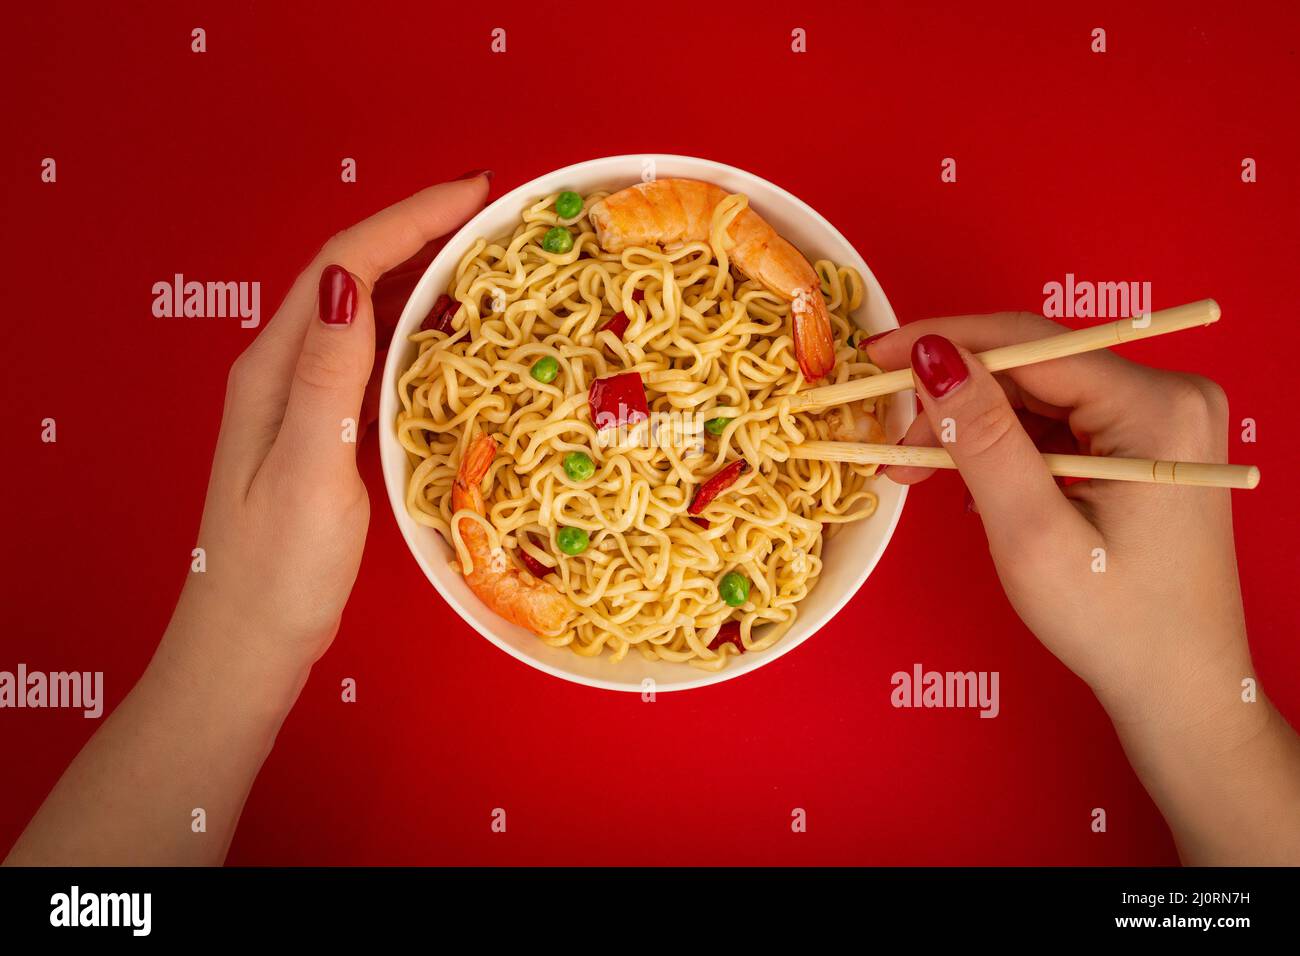 Female hands with bowl of shrimp noodles on red background Stock Photo